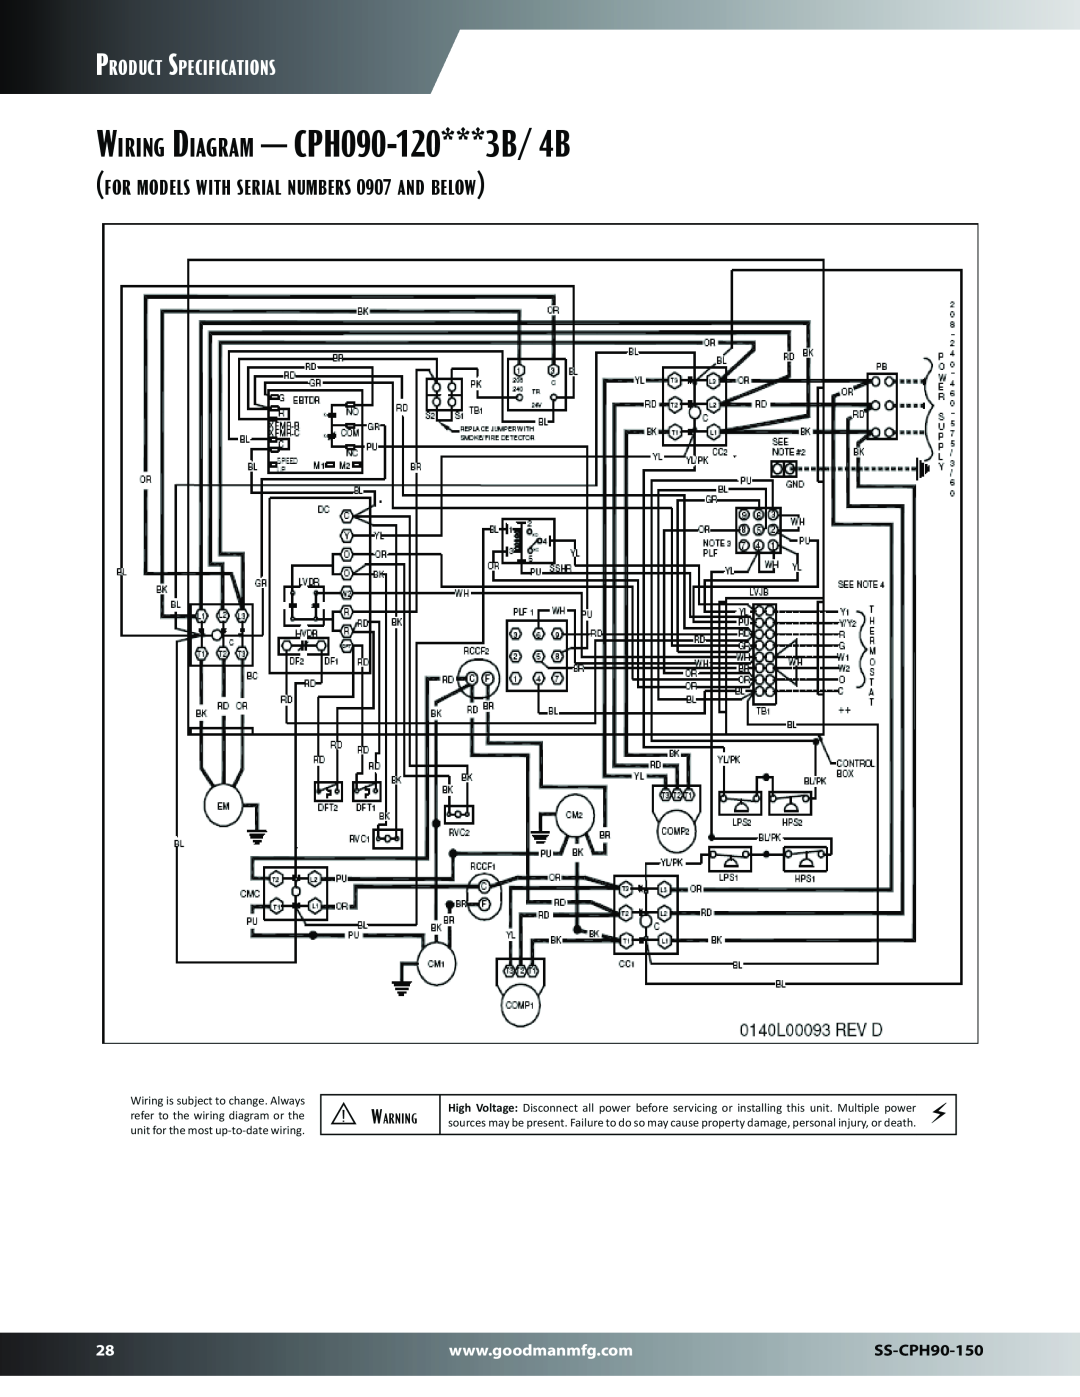 Goodman Mfg SS-CPH90-150 dimensions Wiring Diagram - CPH090-120***3B/4B, for models with serial numbers 0907 and below 